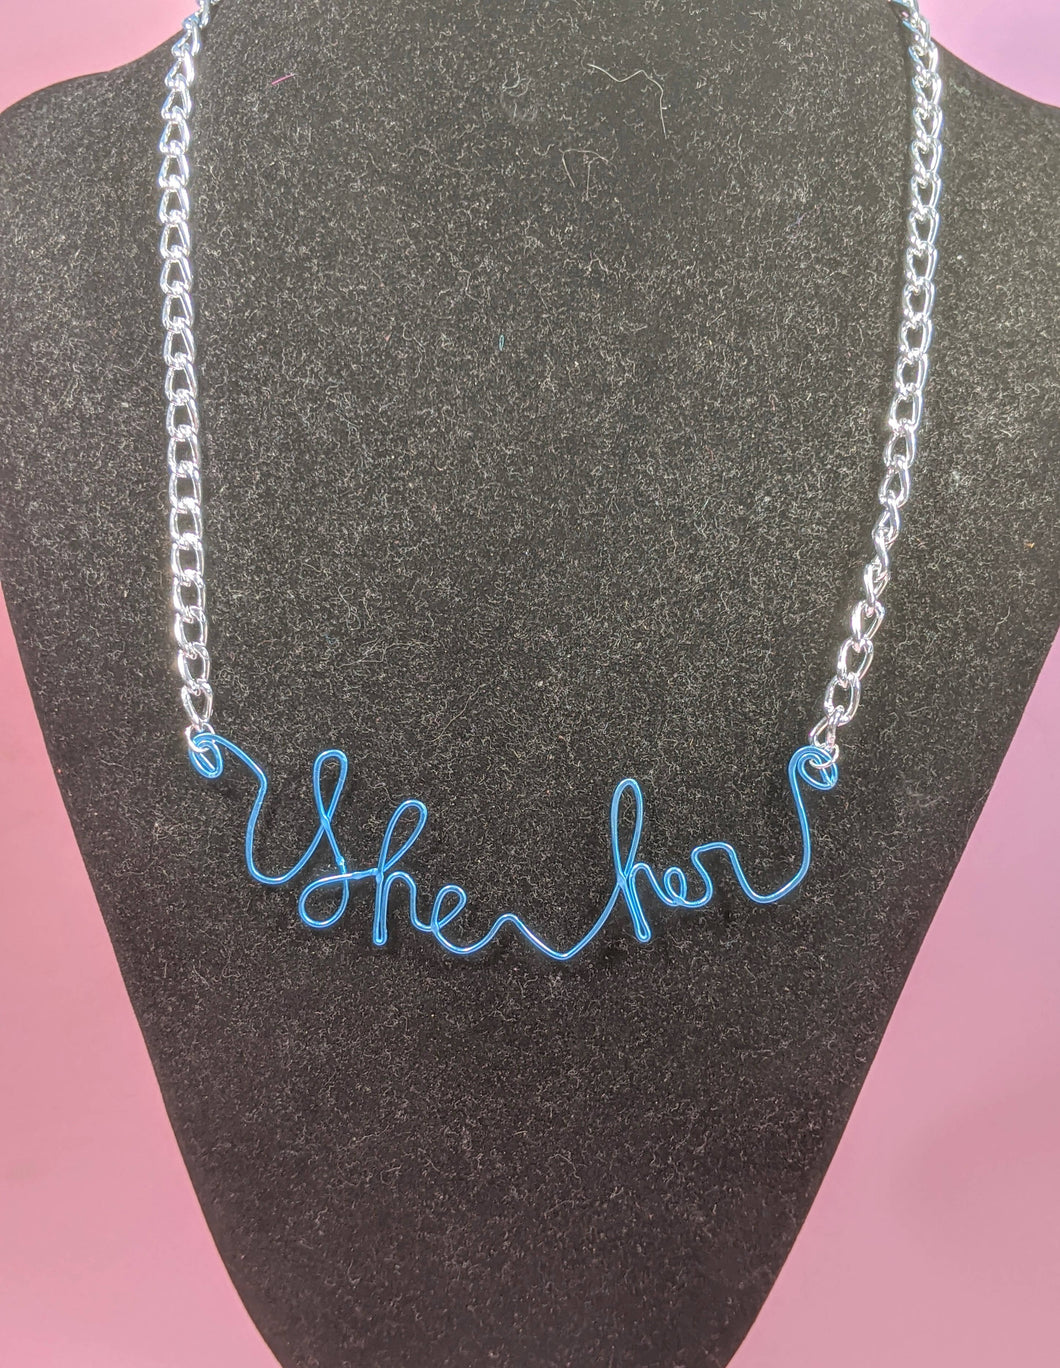 She/Her Talisman Necklace - Blue